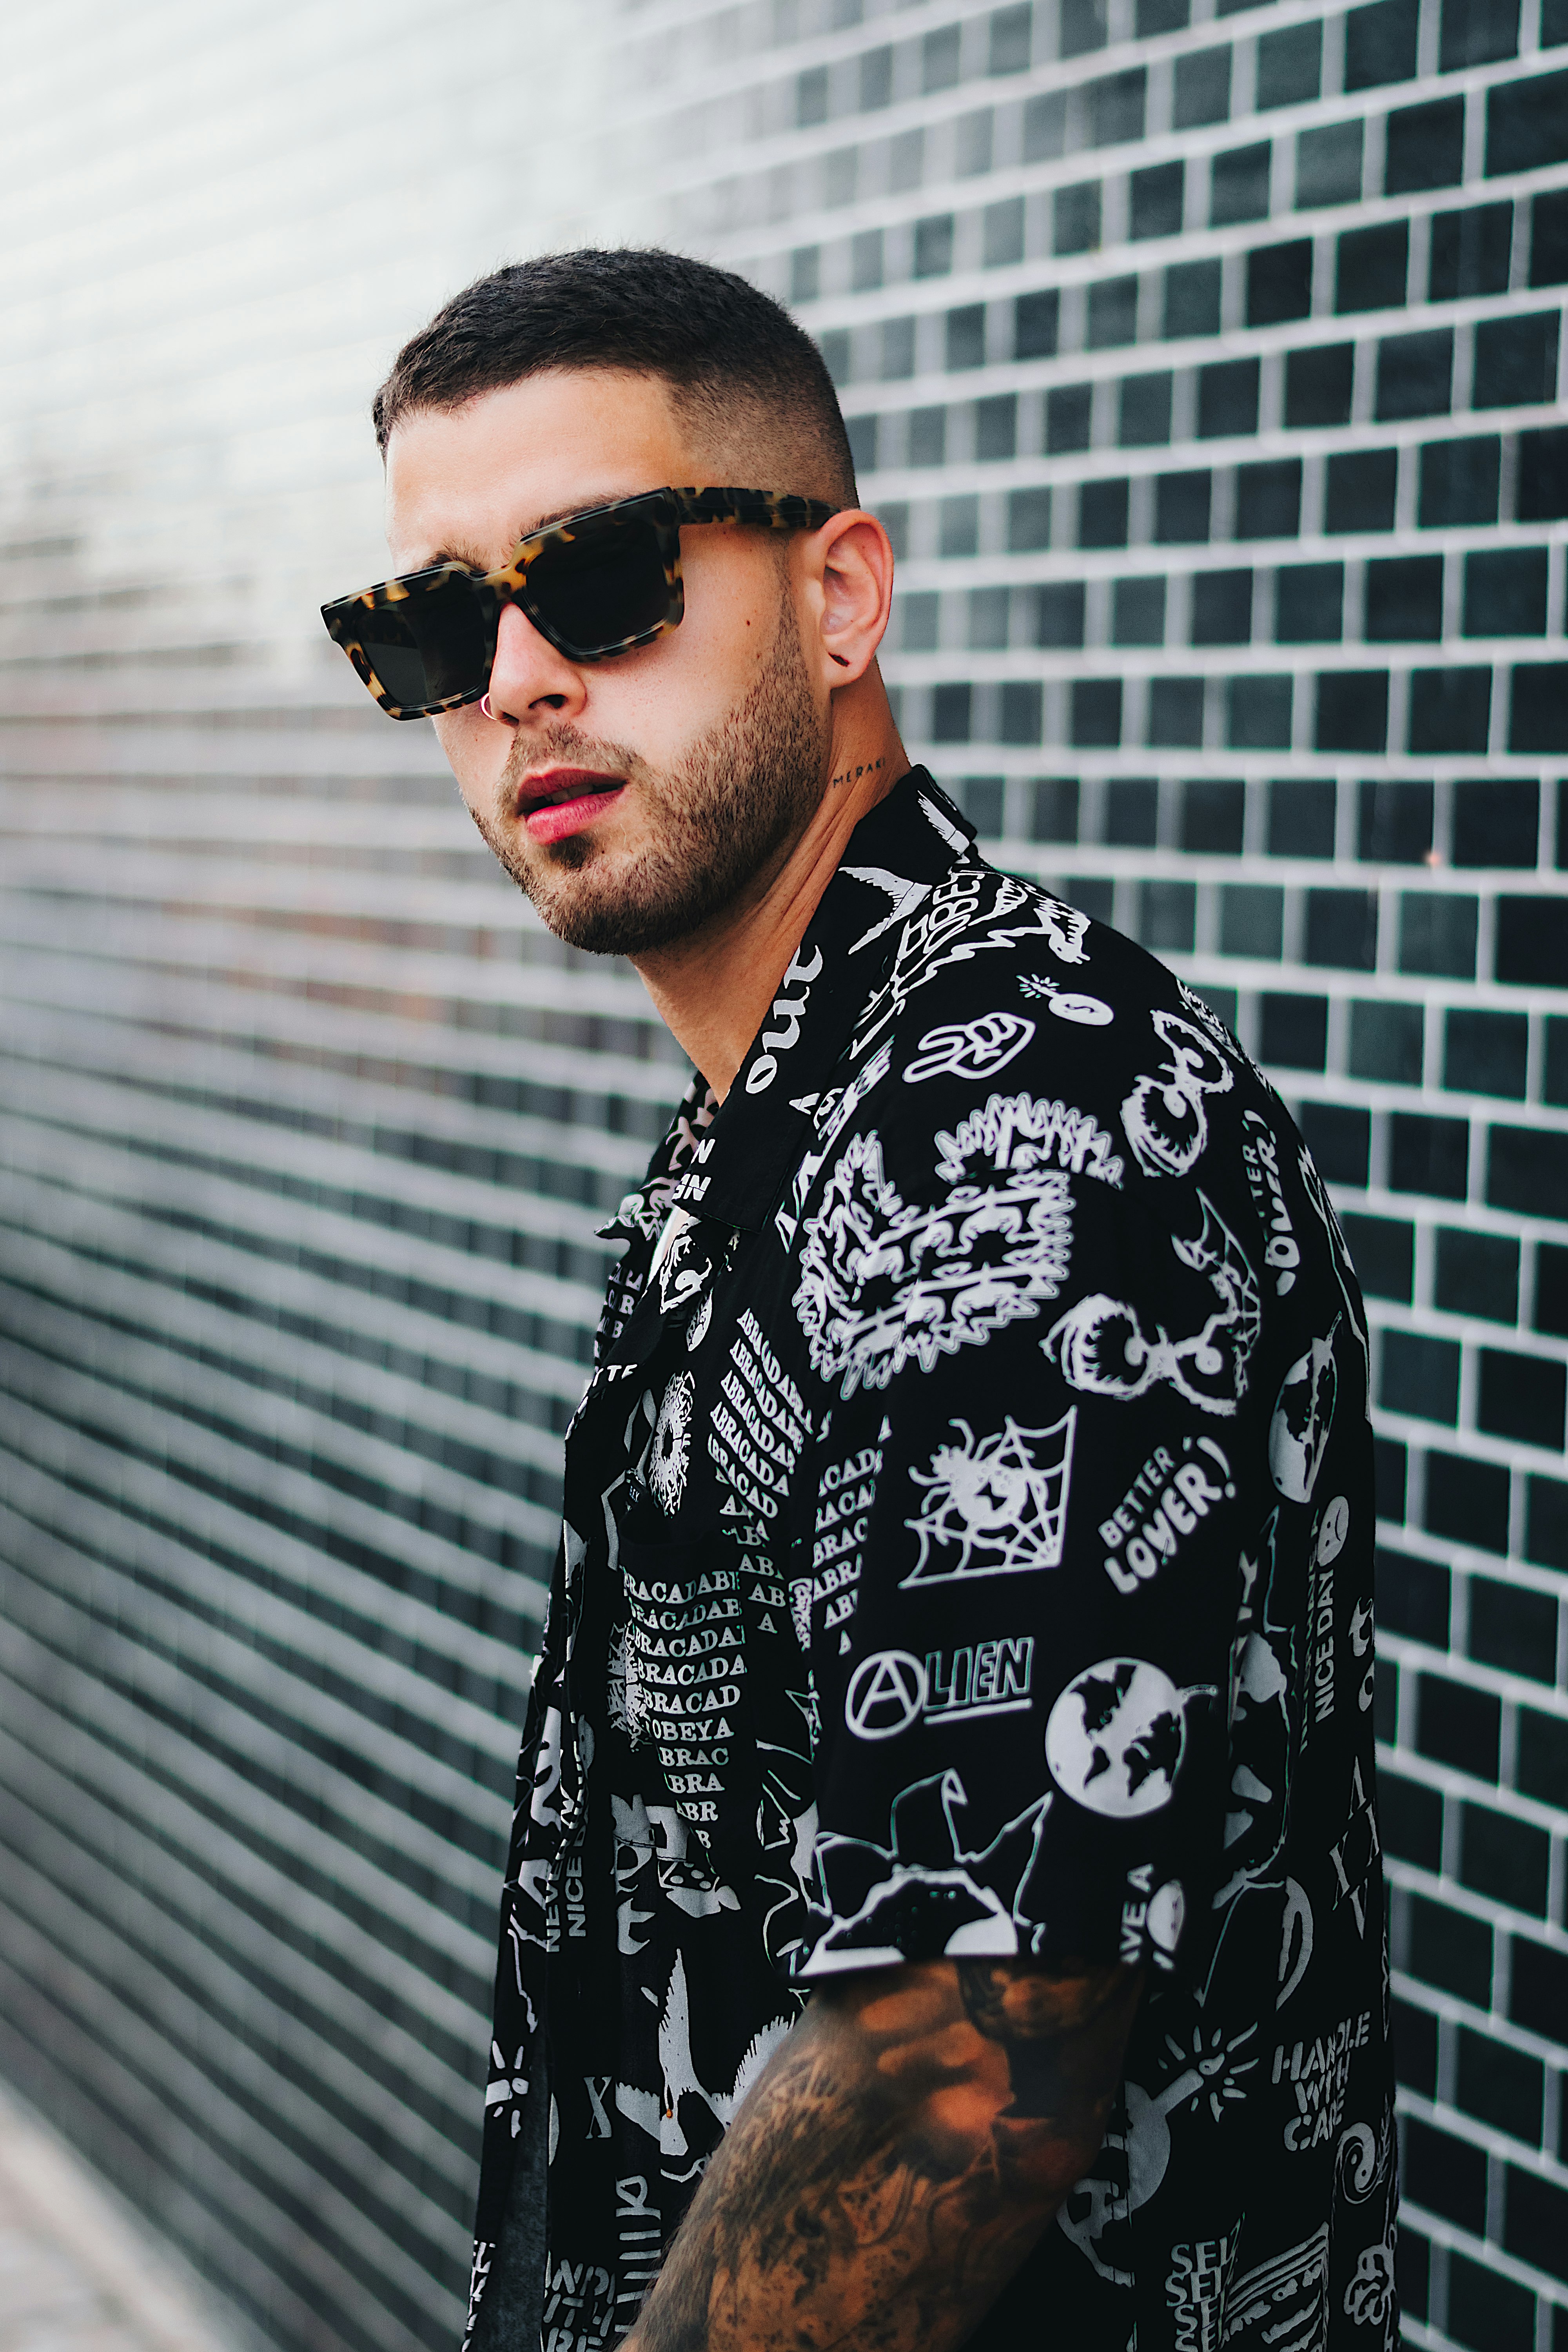 man in black and white floral button up shirt wearing black sunglasses